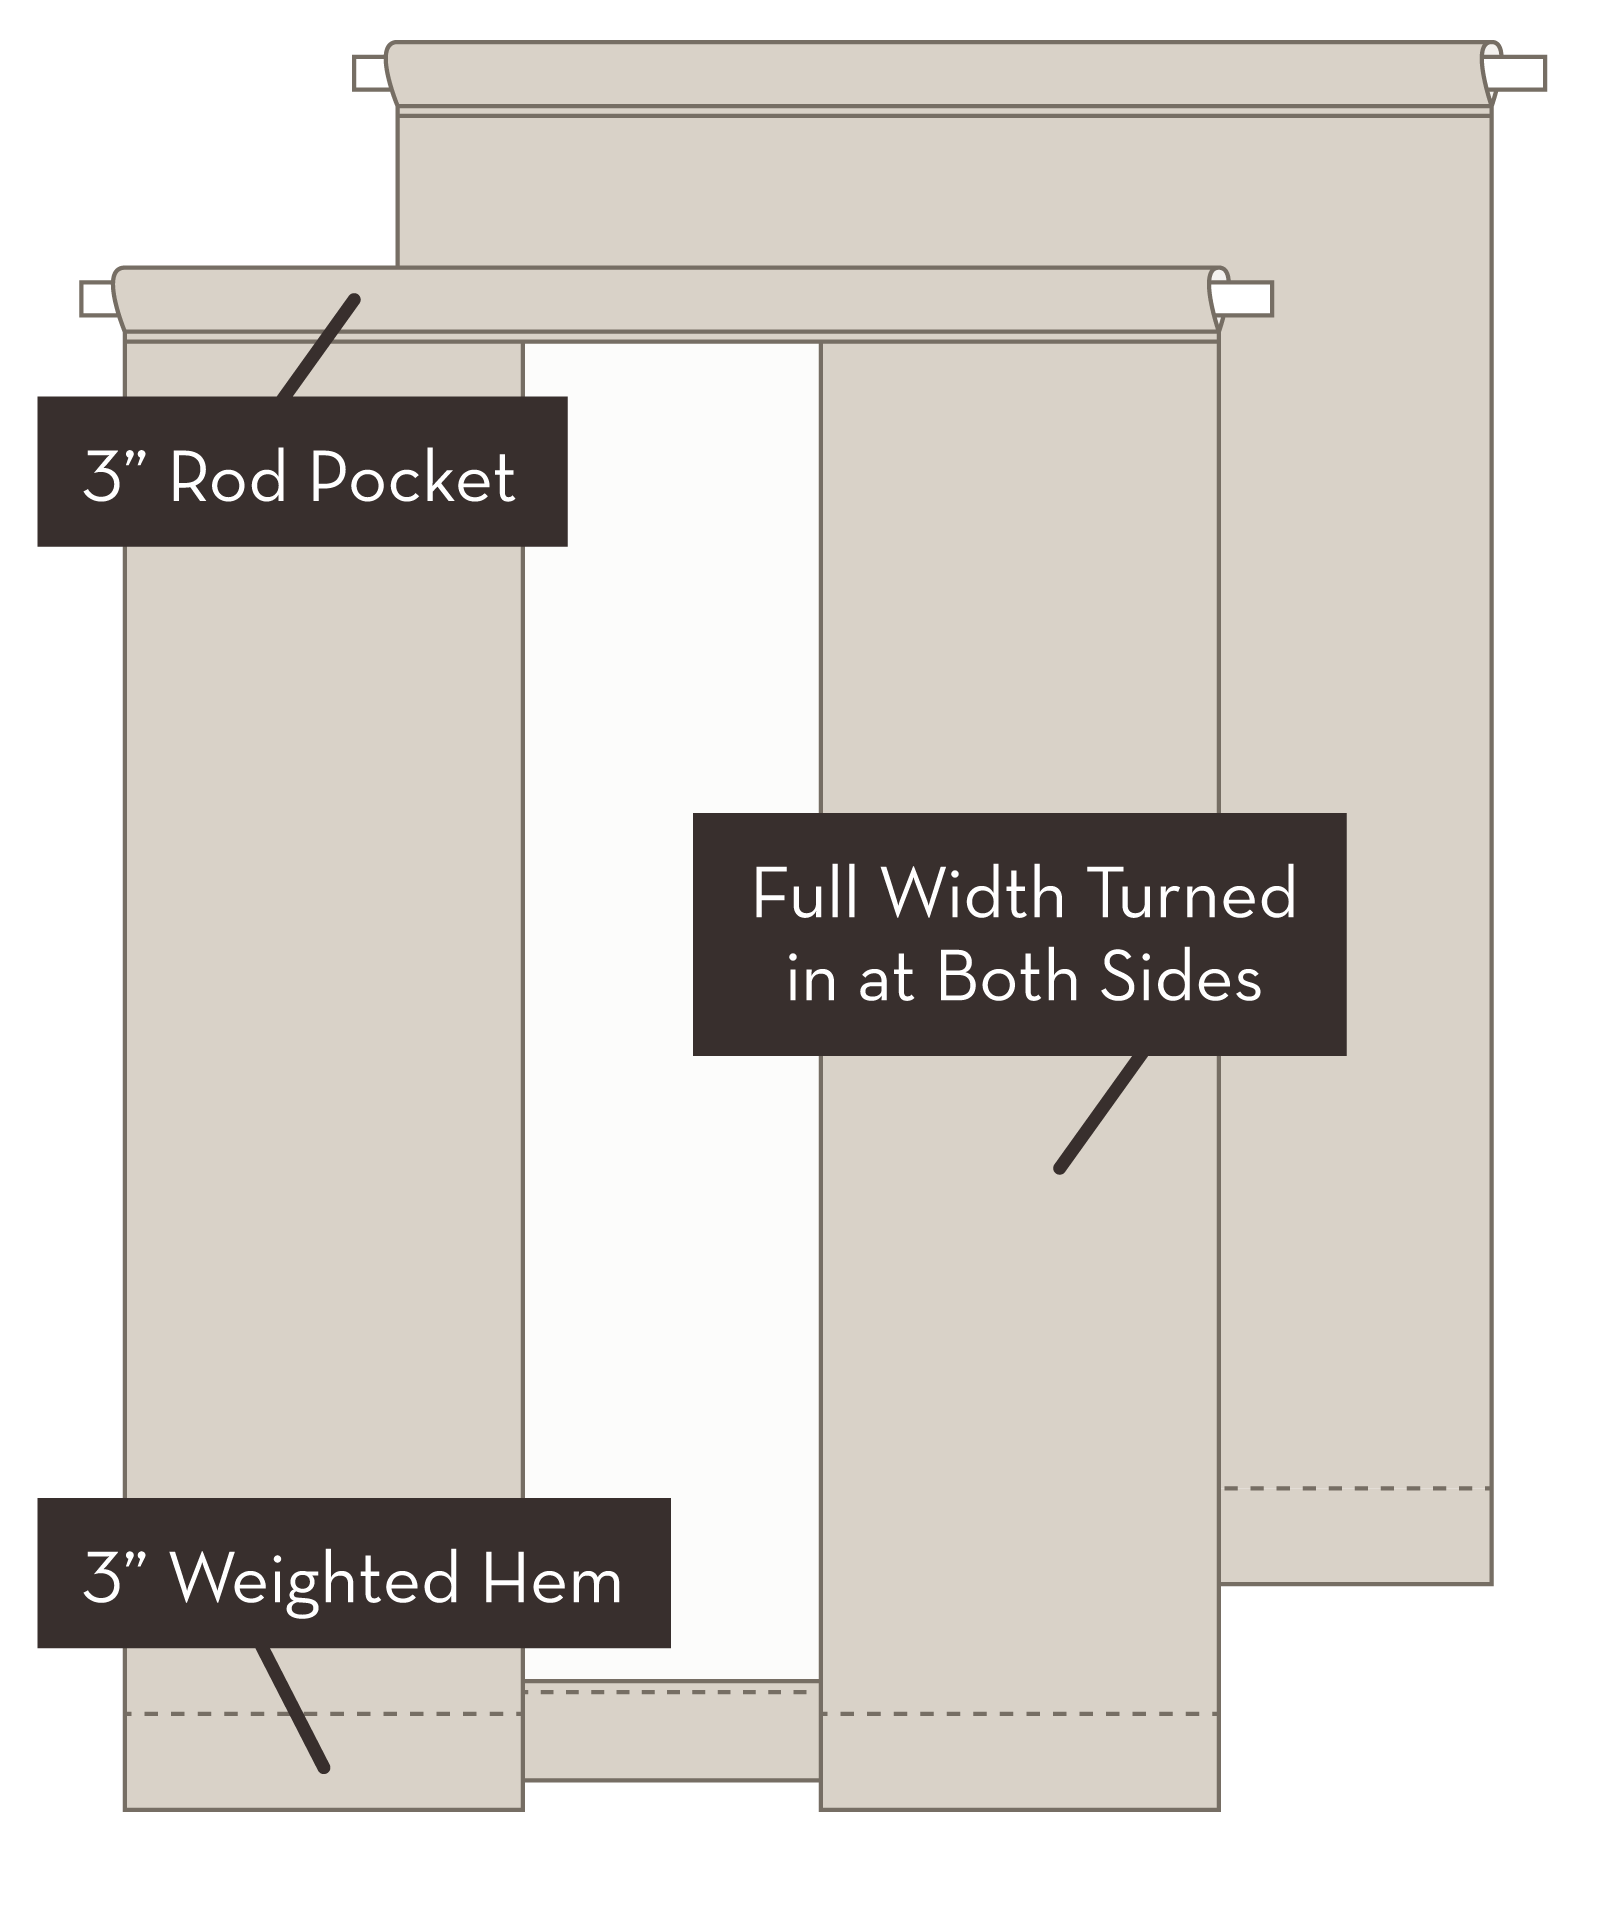 illustration of a textile wing display construction